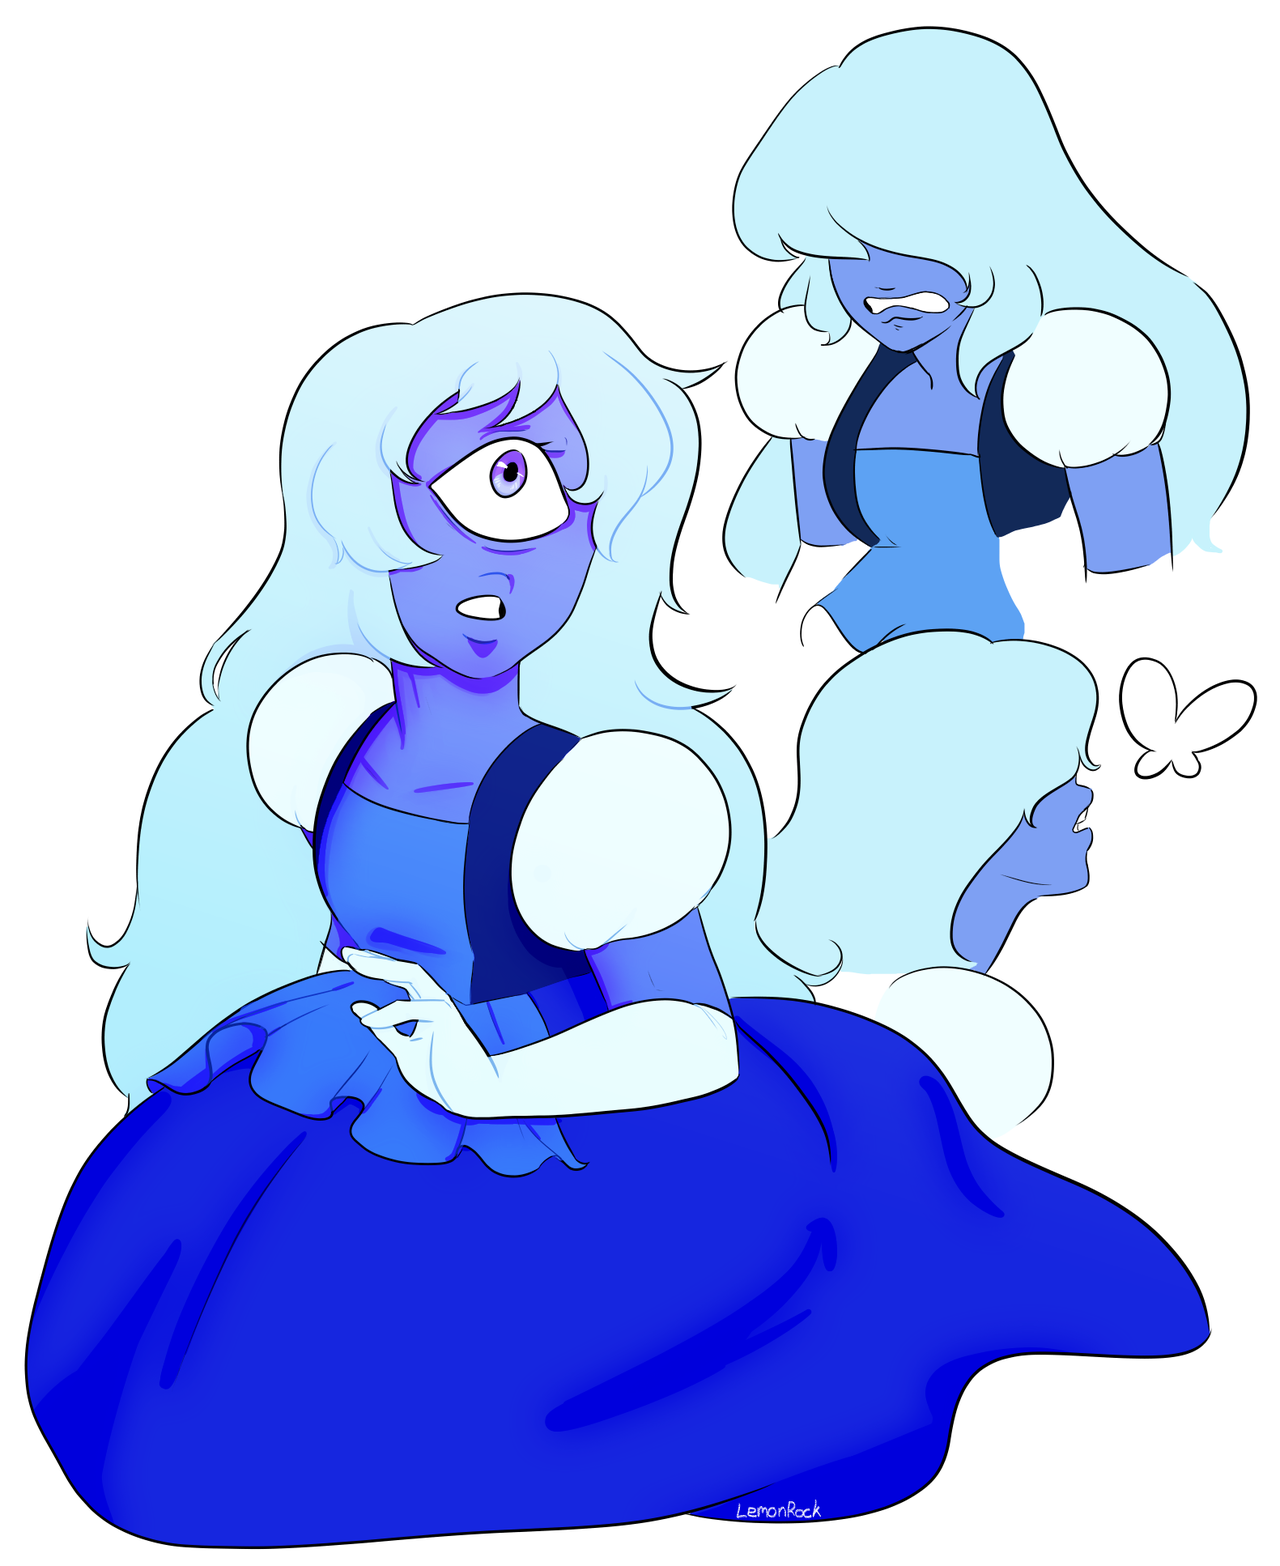 some sapphires from awhile back